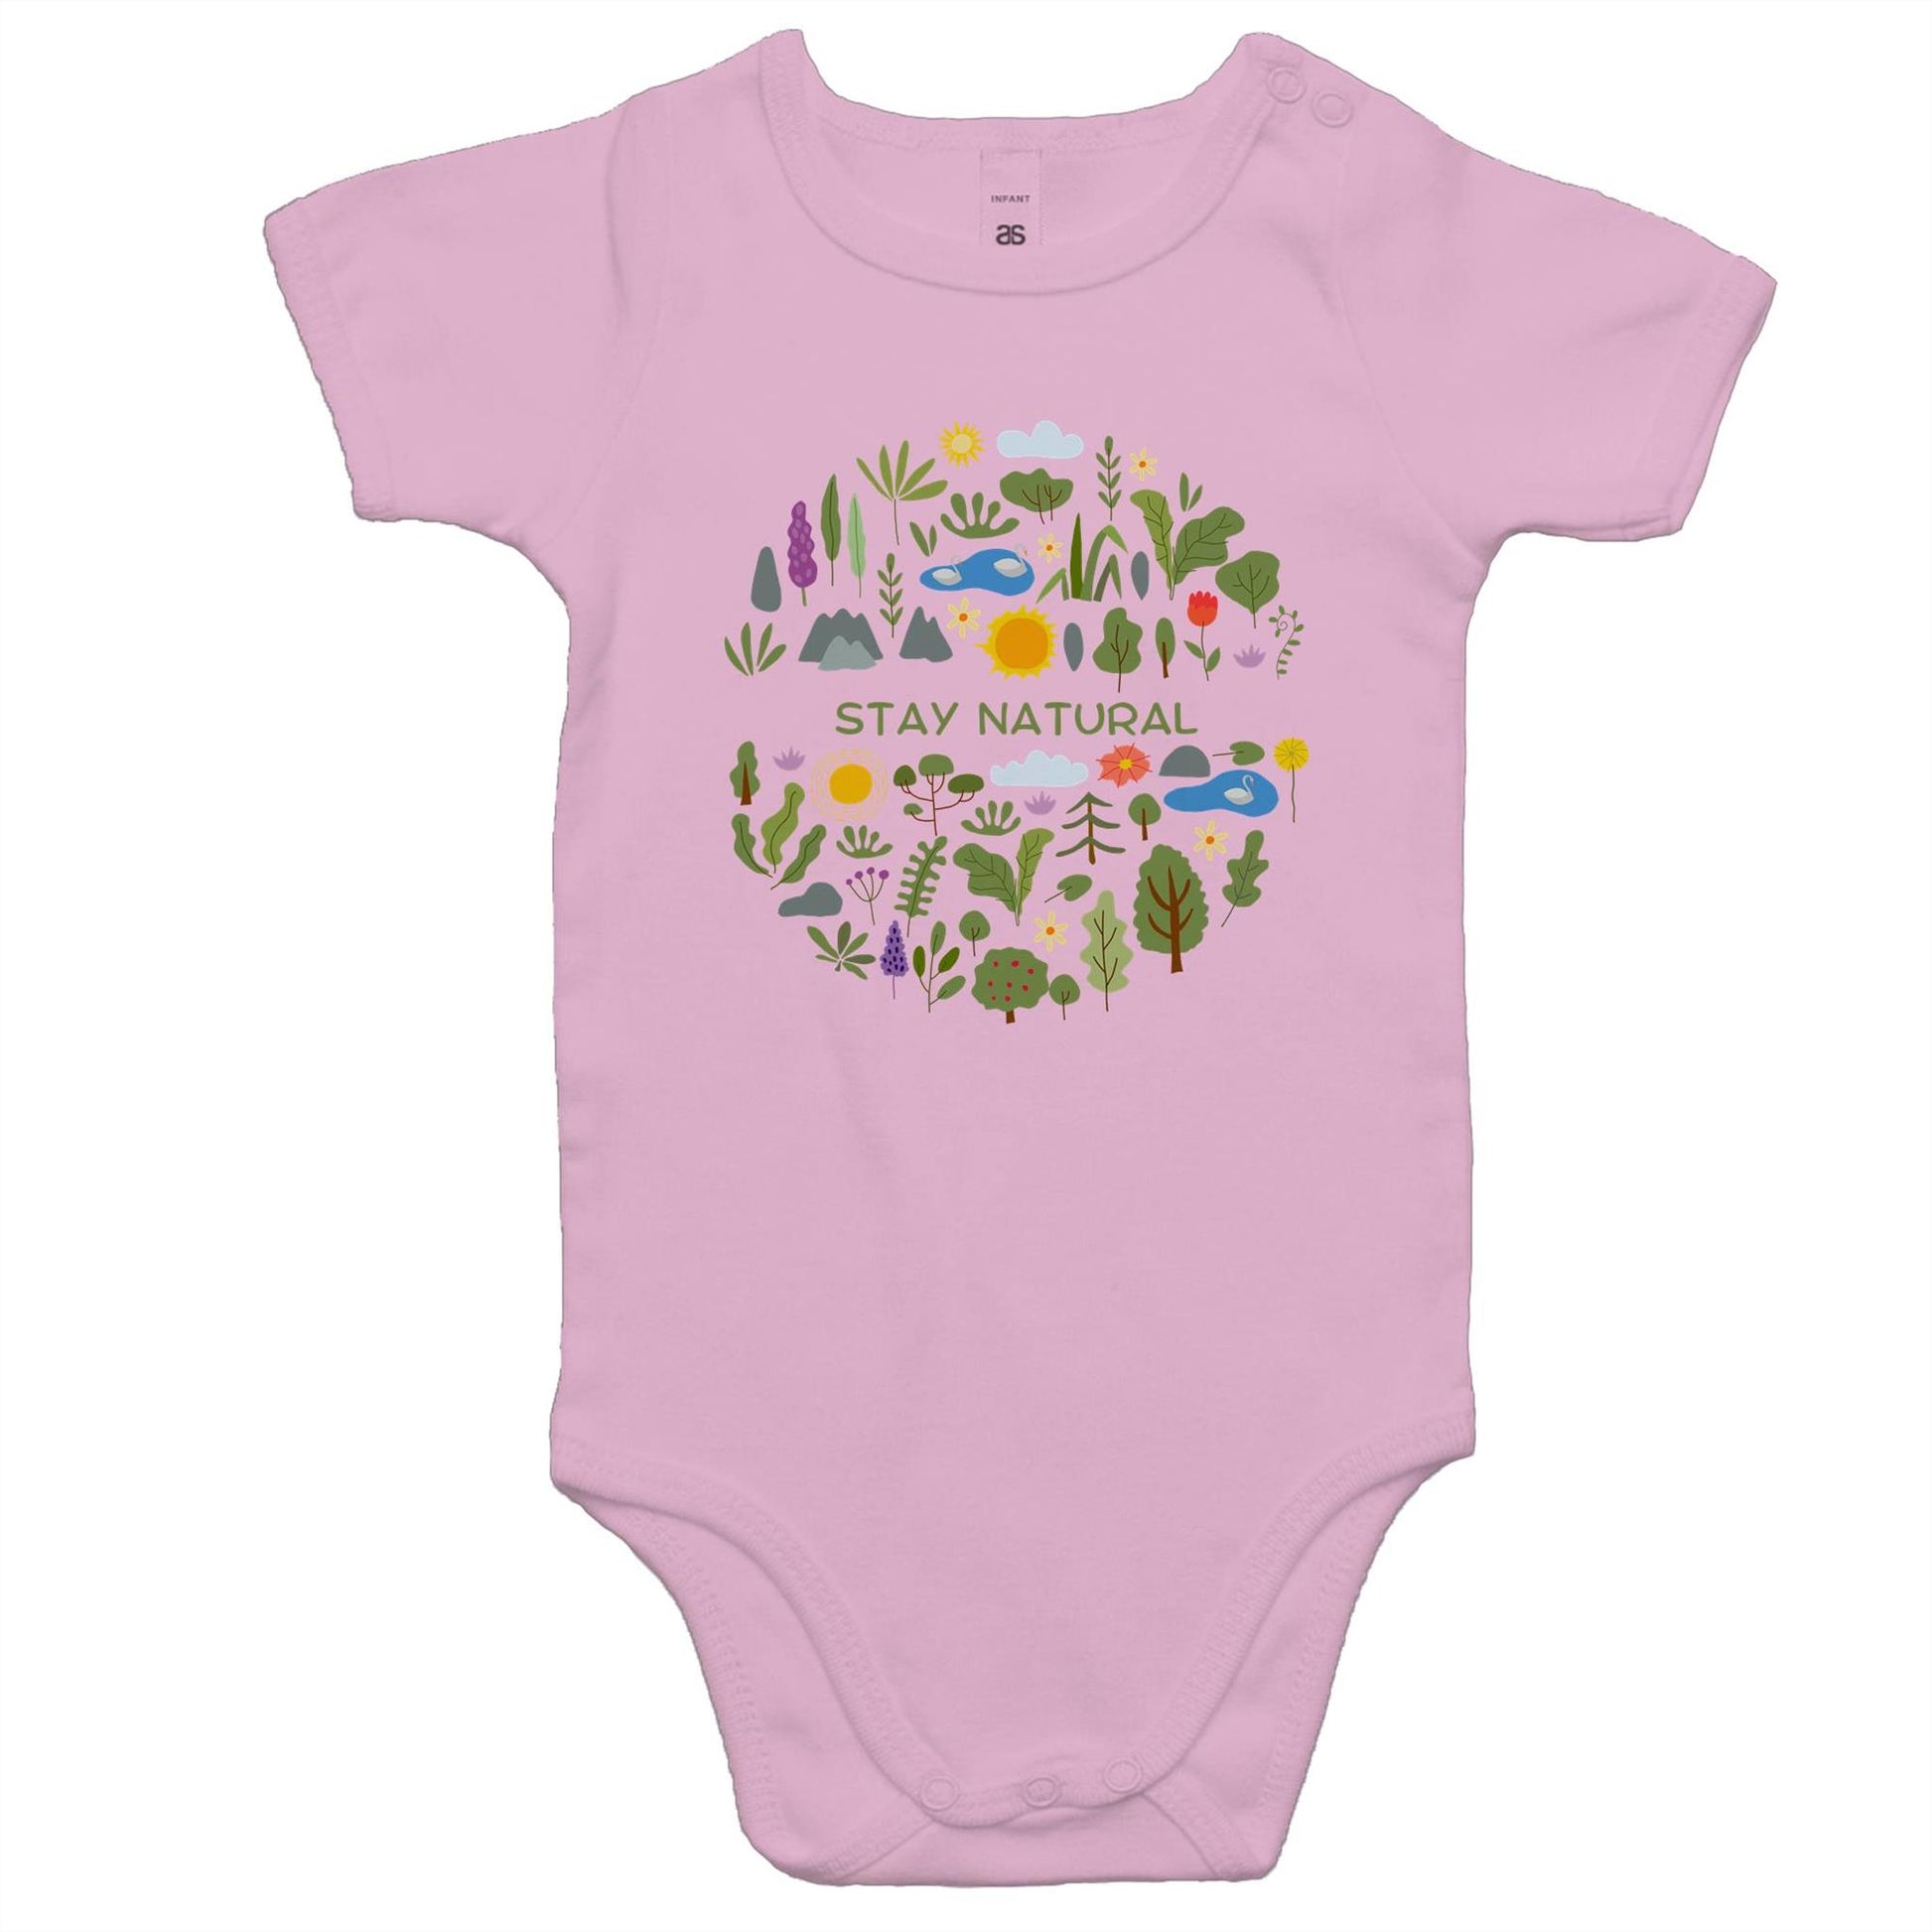 Stay Natural - Baby Bodysuit Pink Baby Bodysuit Environment Plants